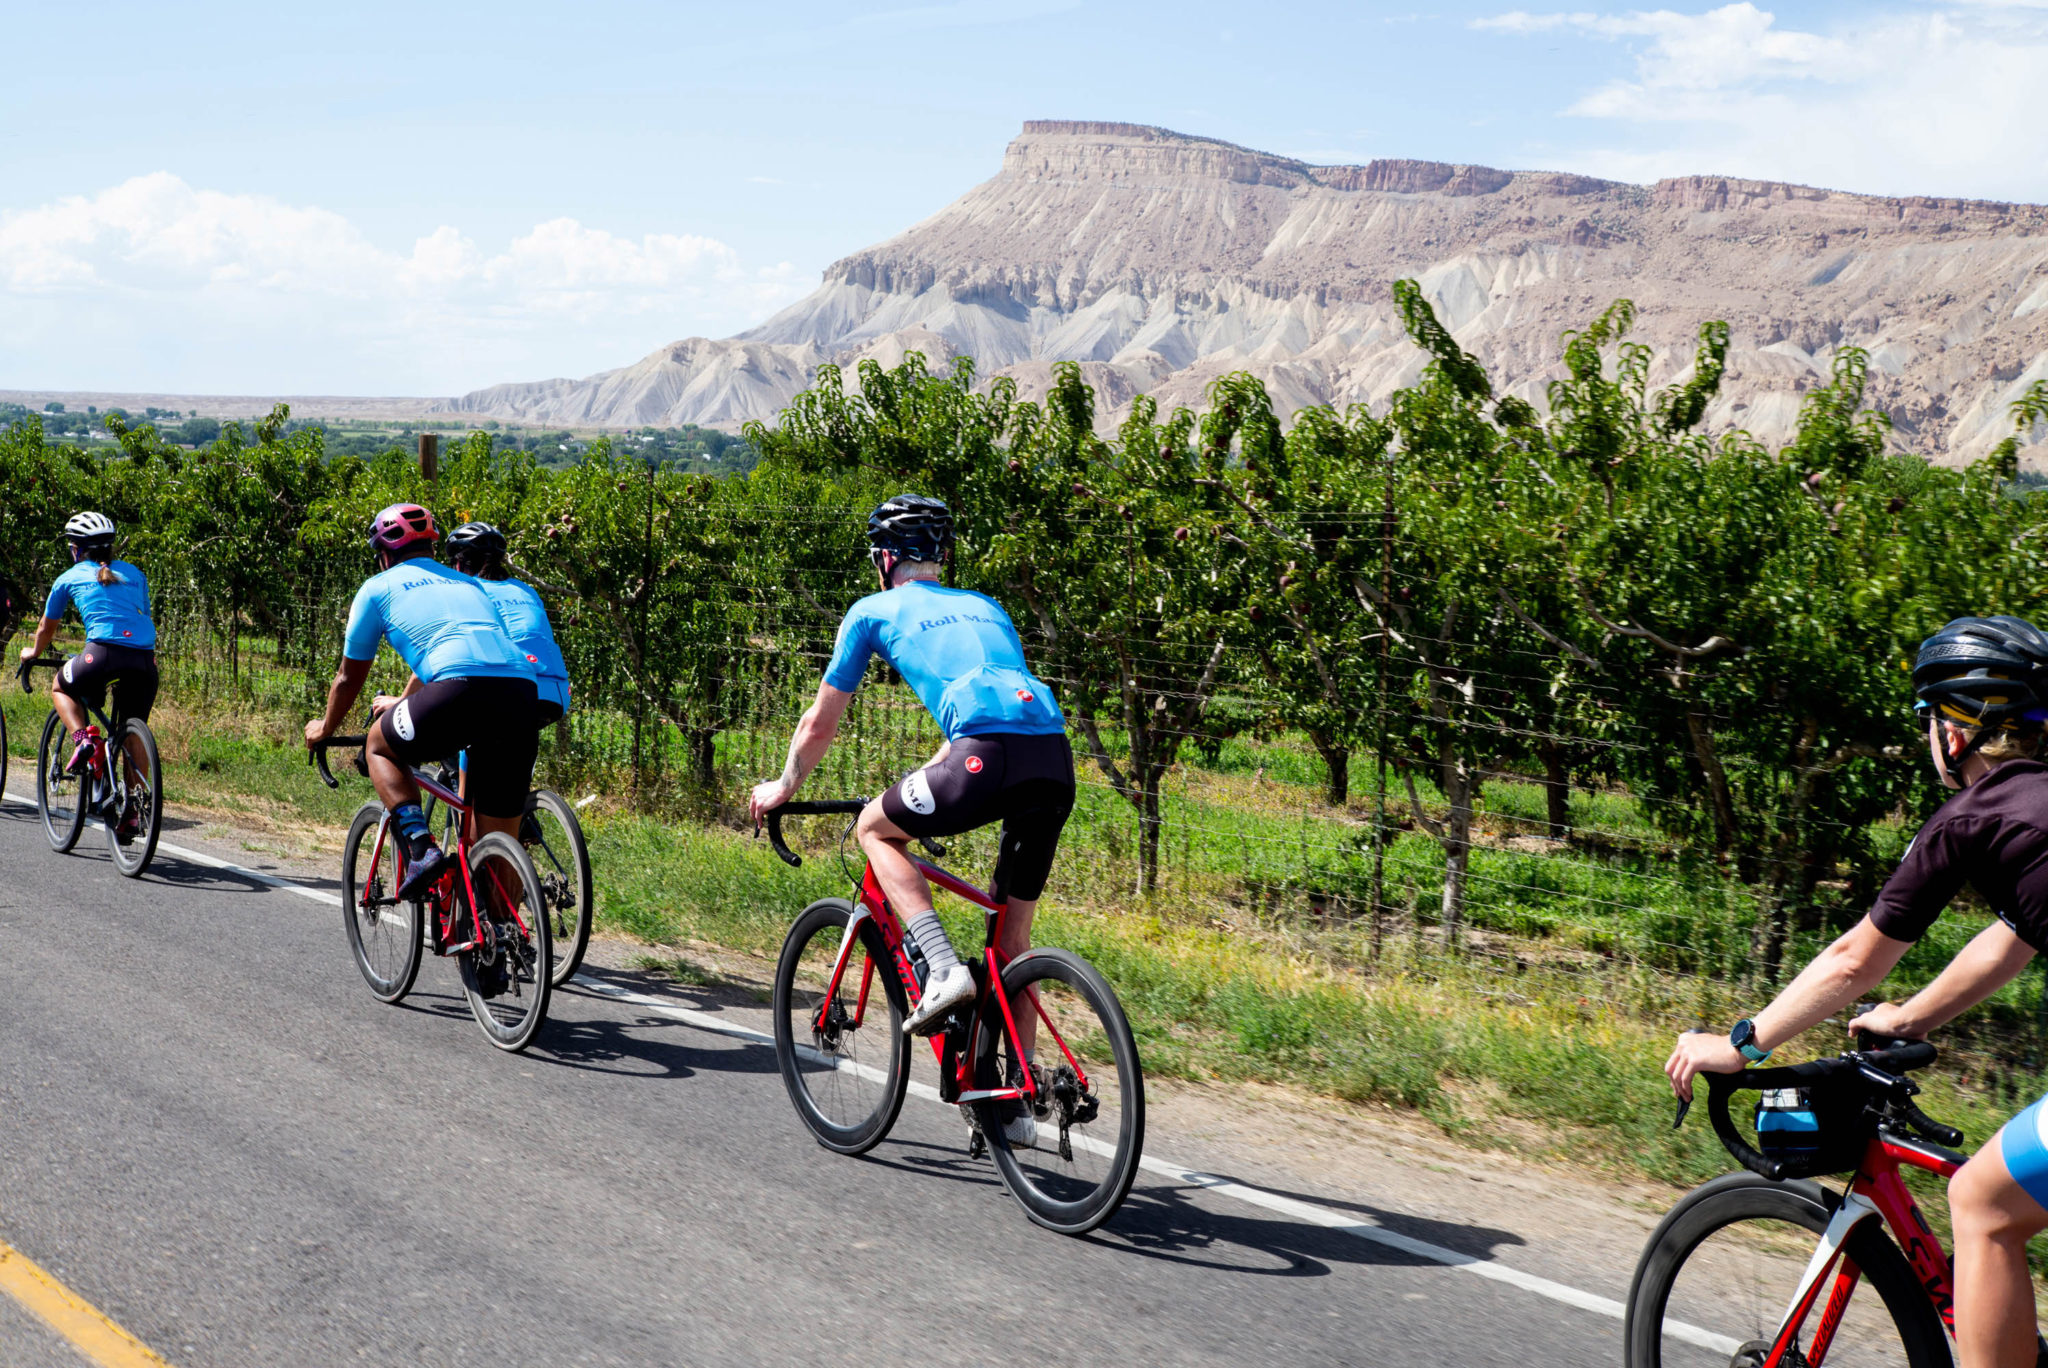 People riding bikes on a paved road alongside a vineyard with the Book Cliffs in the background.